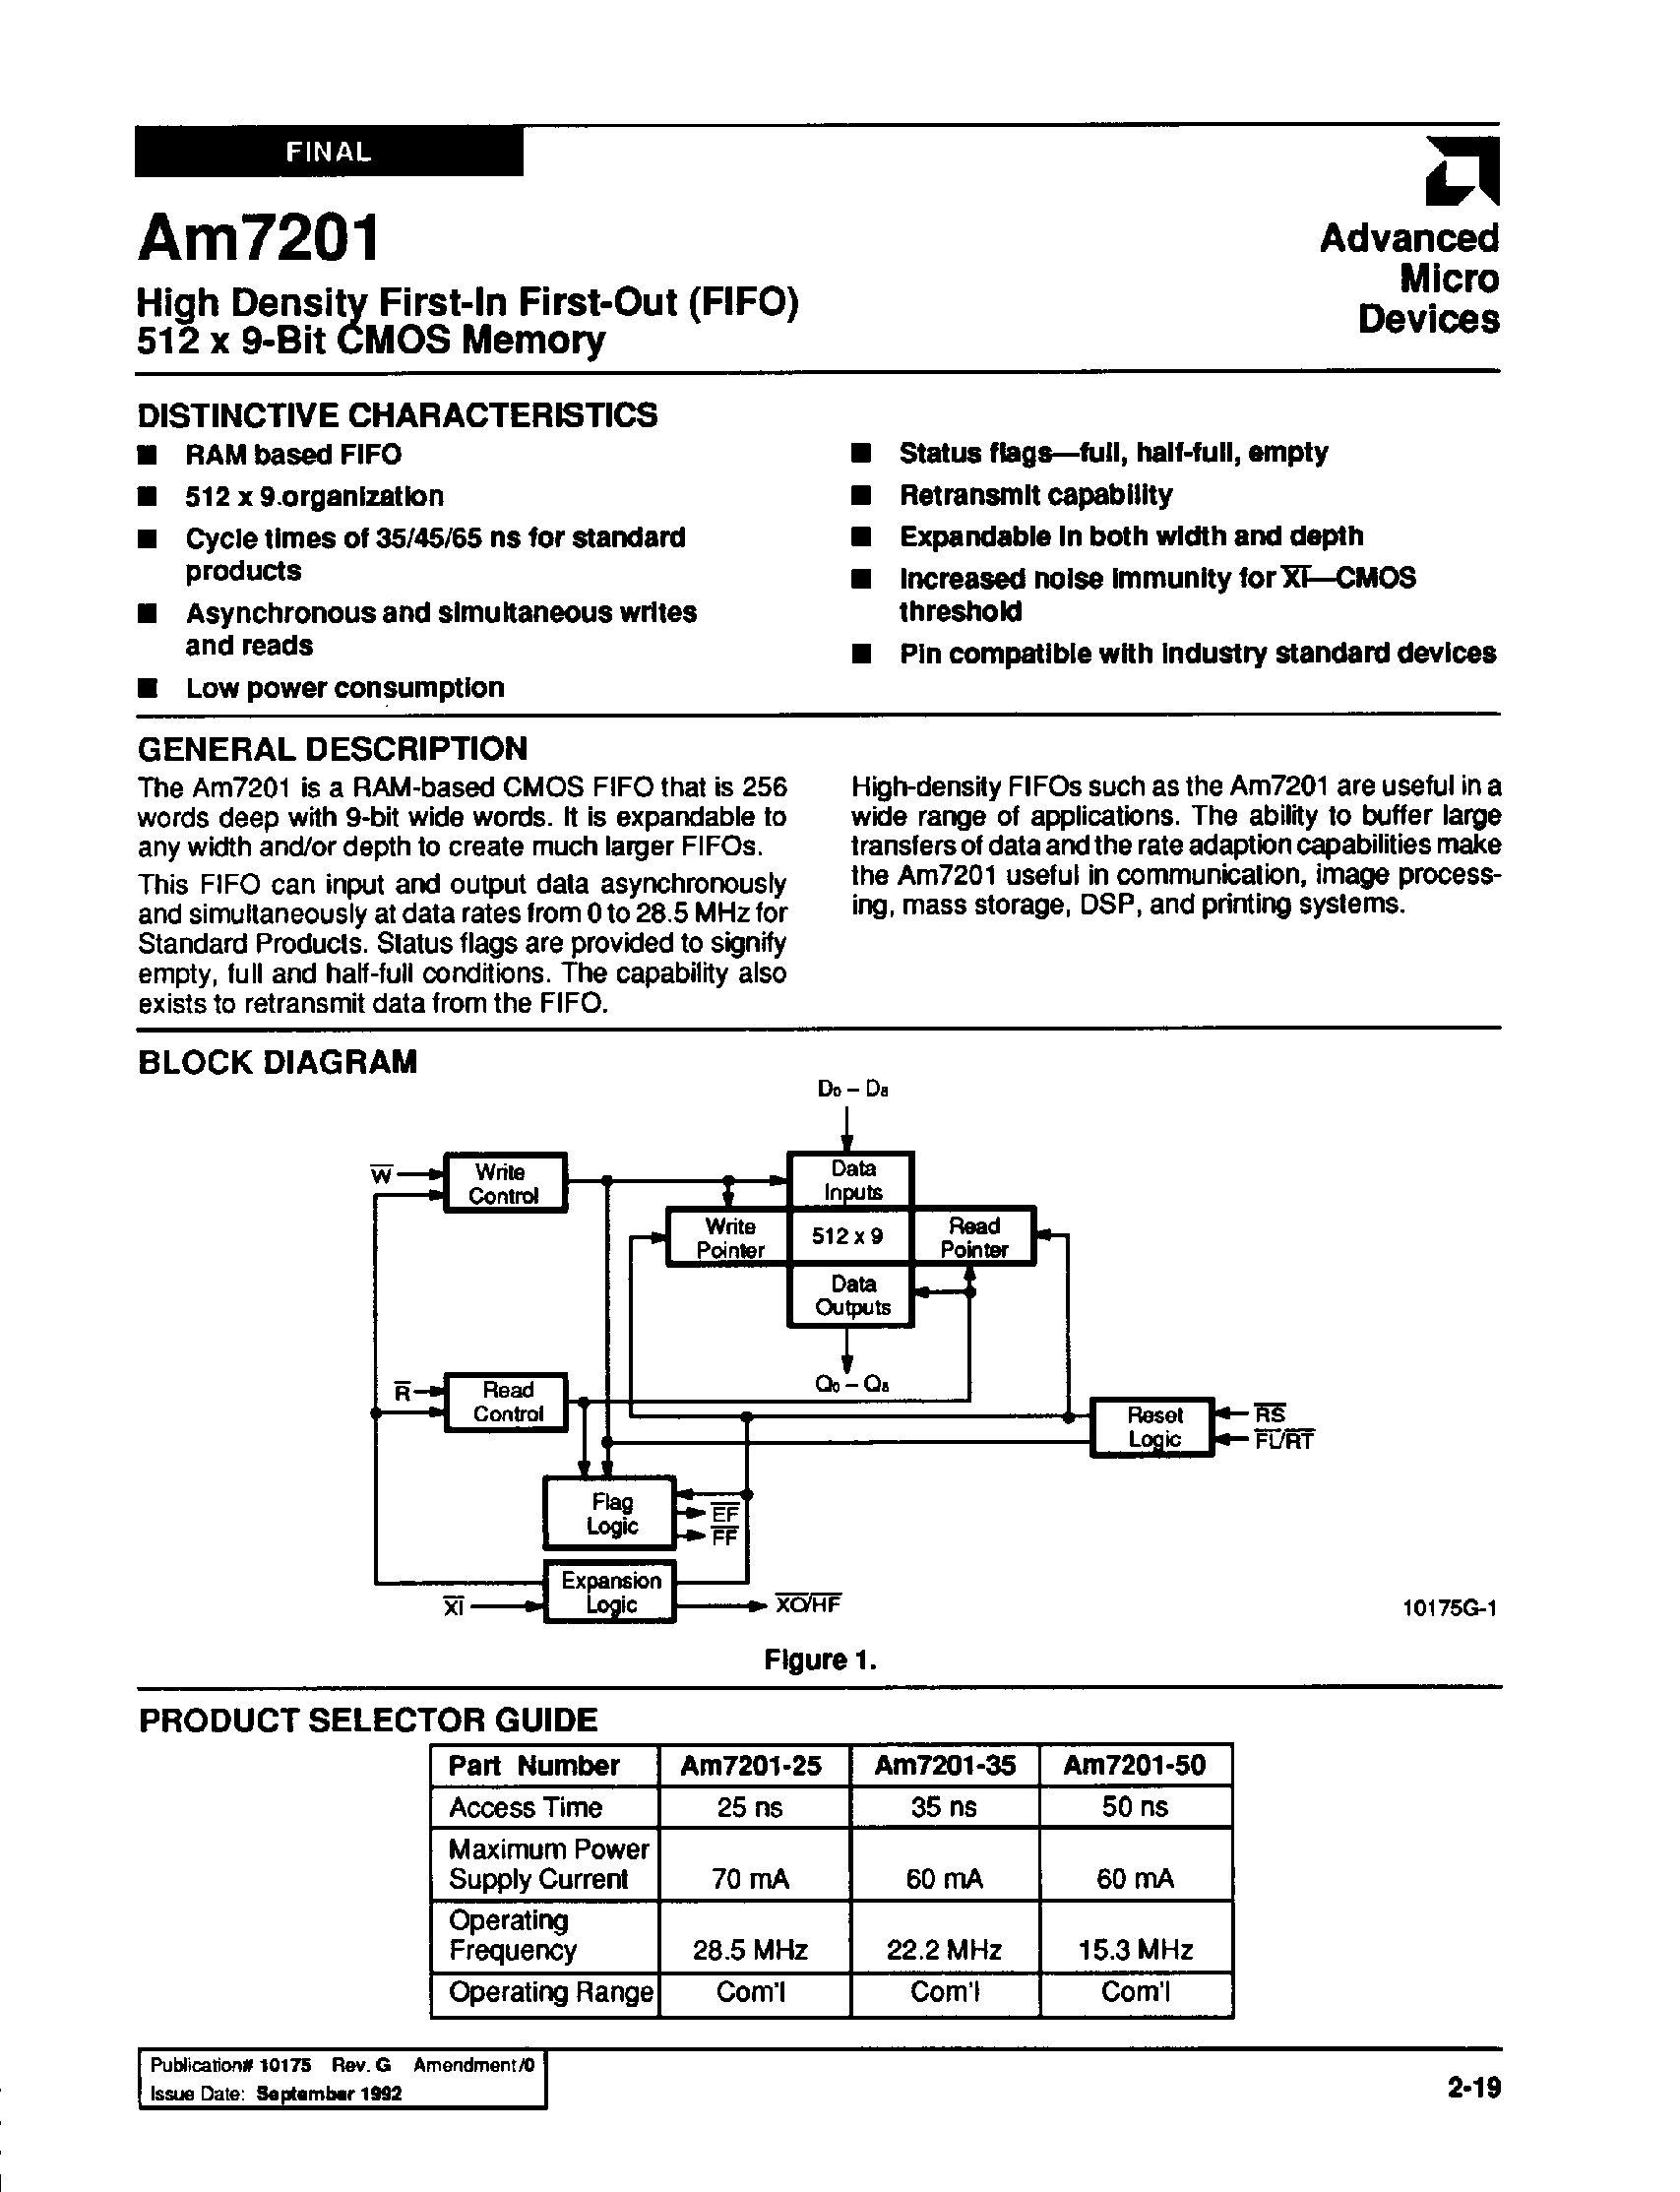 Datasheet AM7201-50 - HIGH DENSITY FIRST-IN FIRST-OUT(FIFO) 512 x 9-BIT CMOS MEMORY page 1